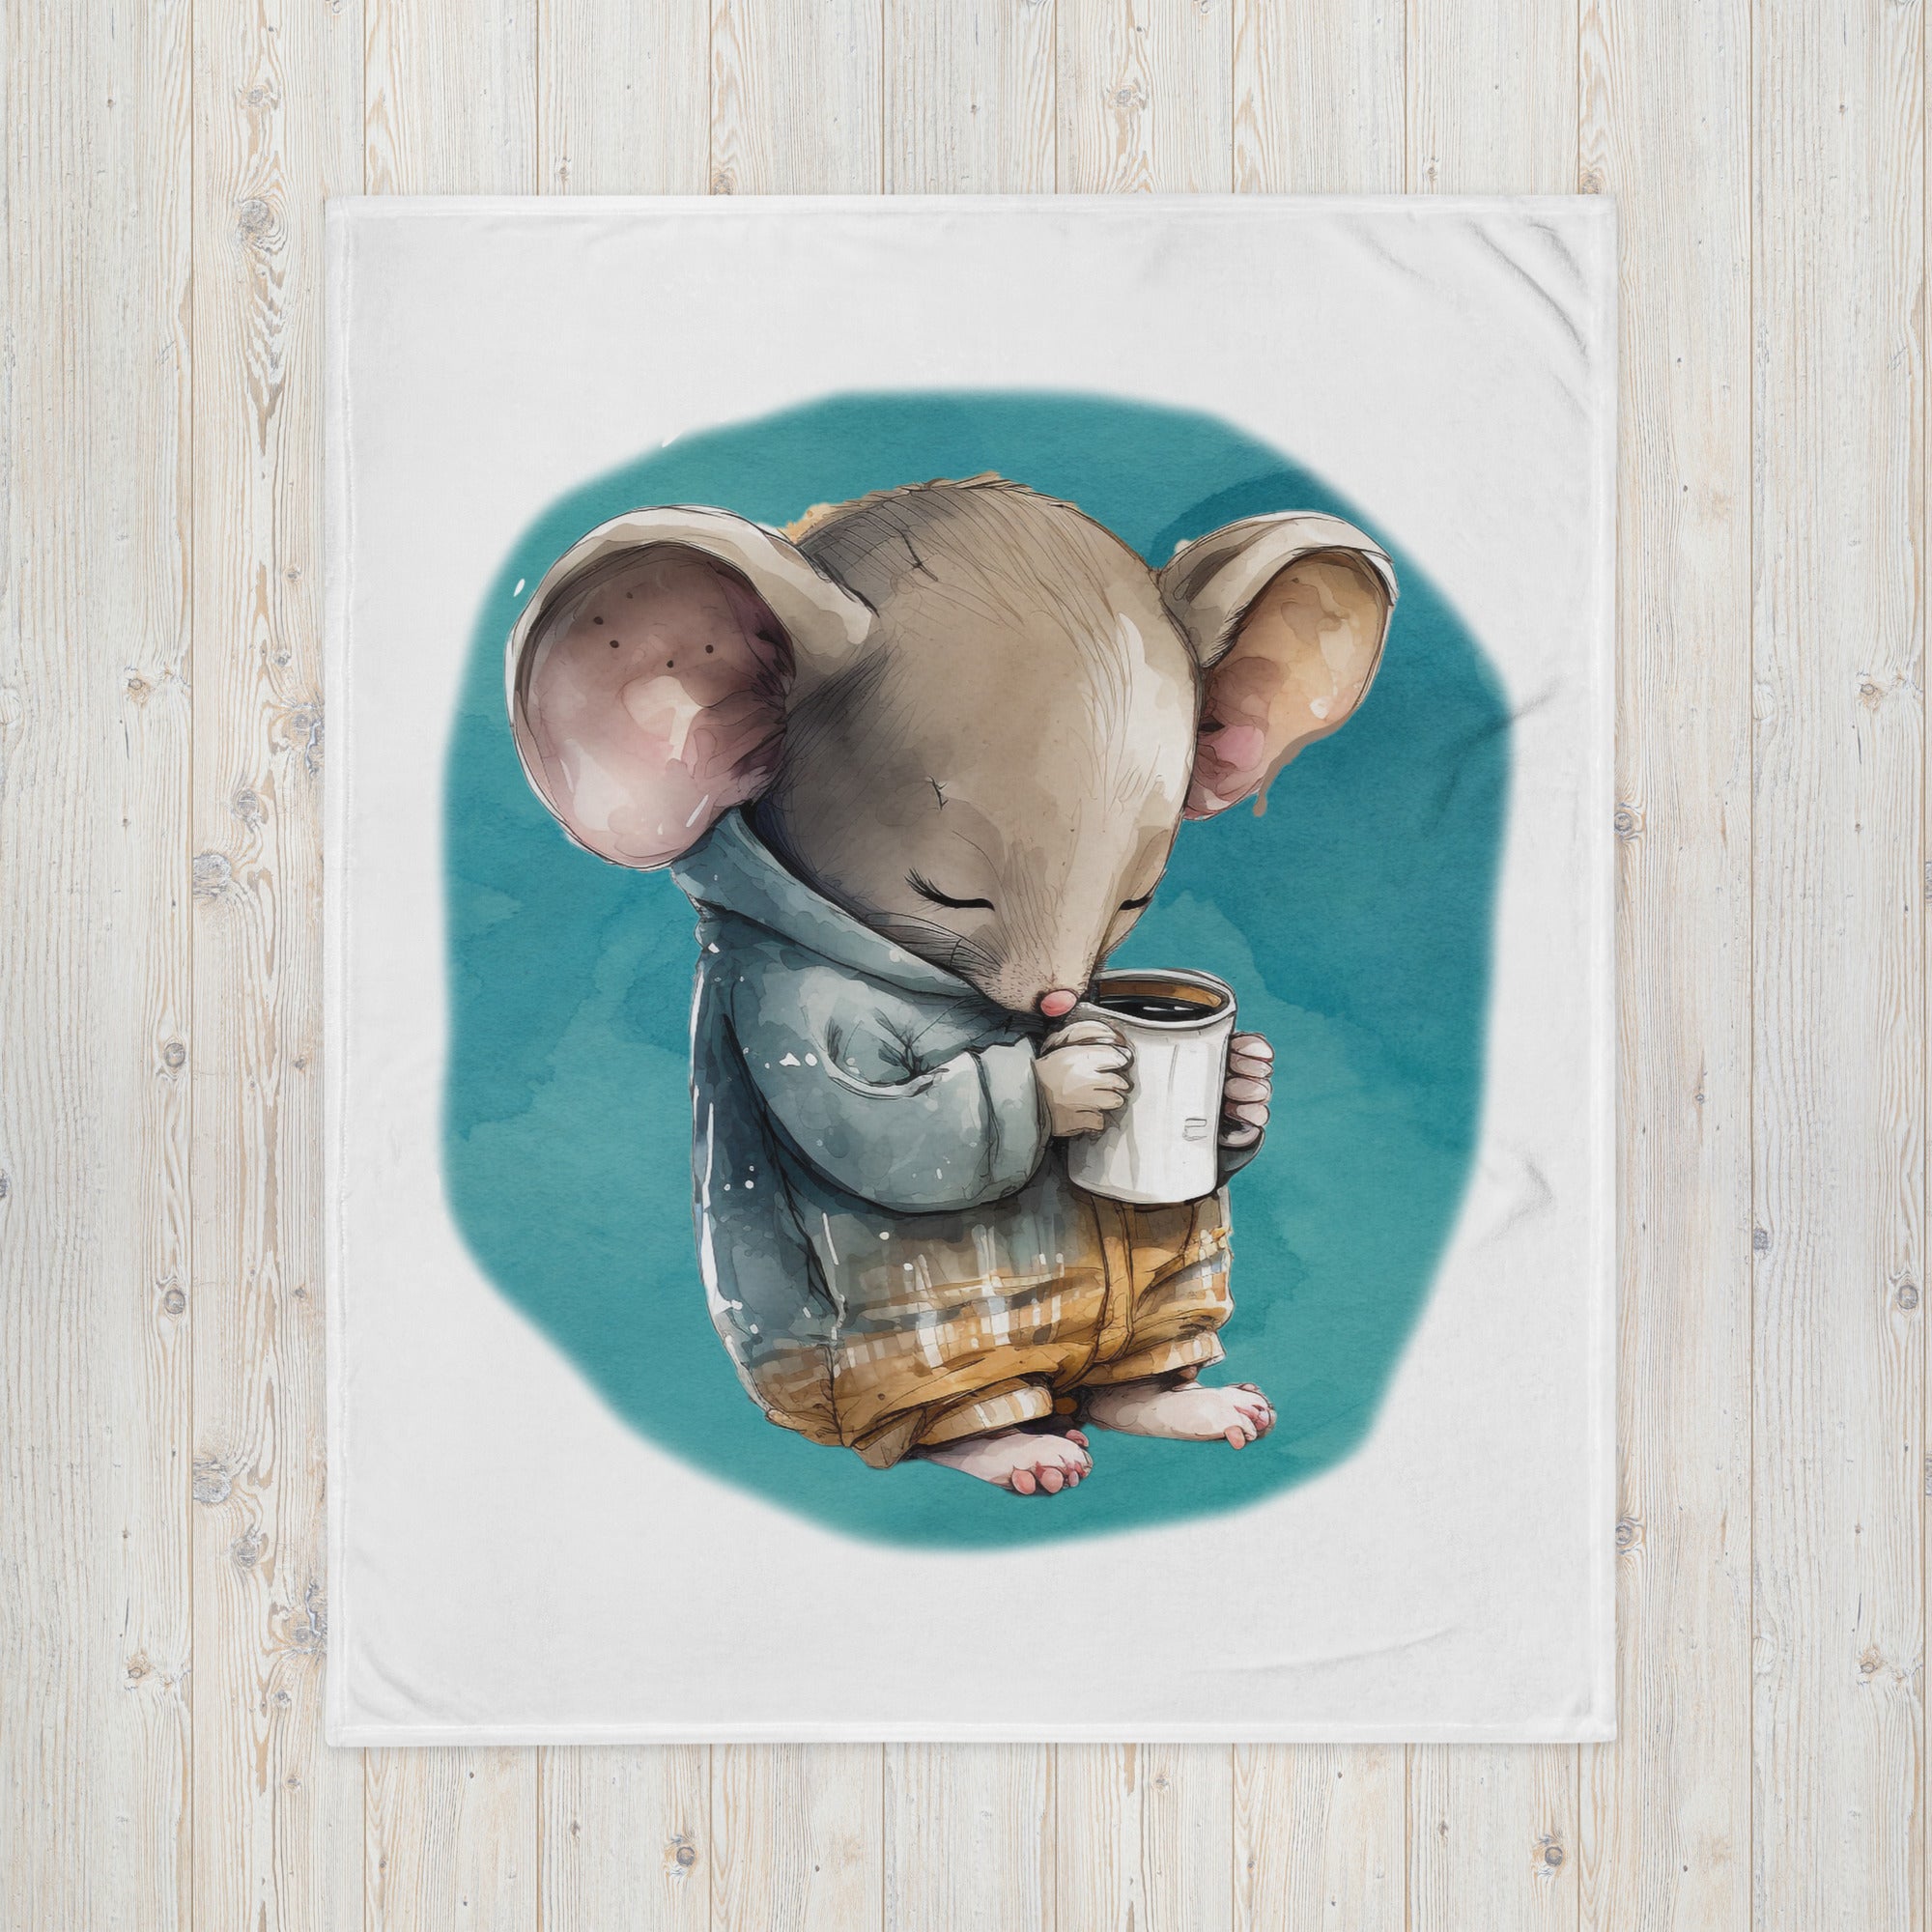 Sleepy Mouse 100% Polyester Soft Silk Touch Fabric Throw Blanket - Cozy, Durable and Adorable